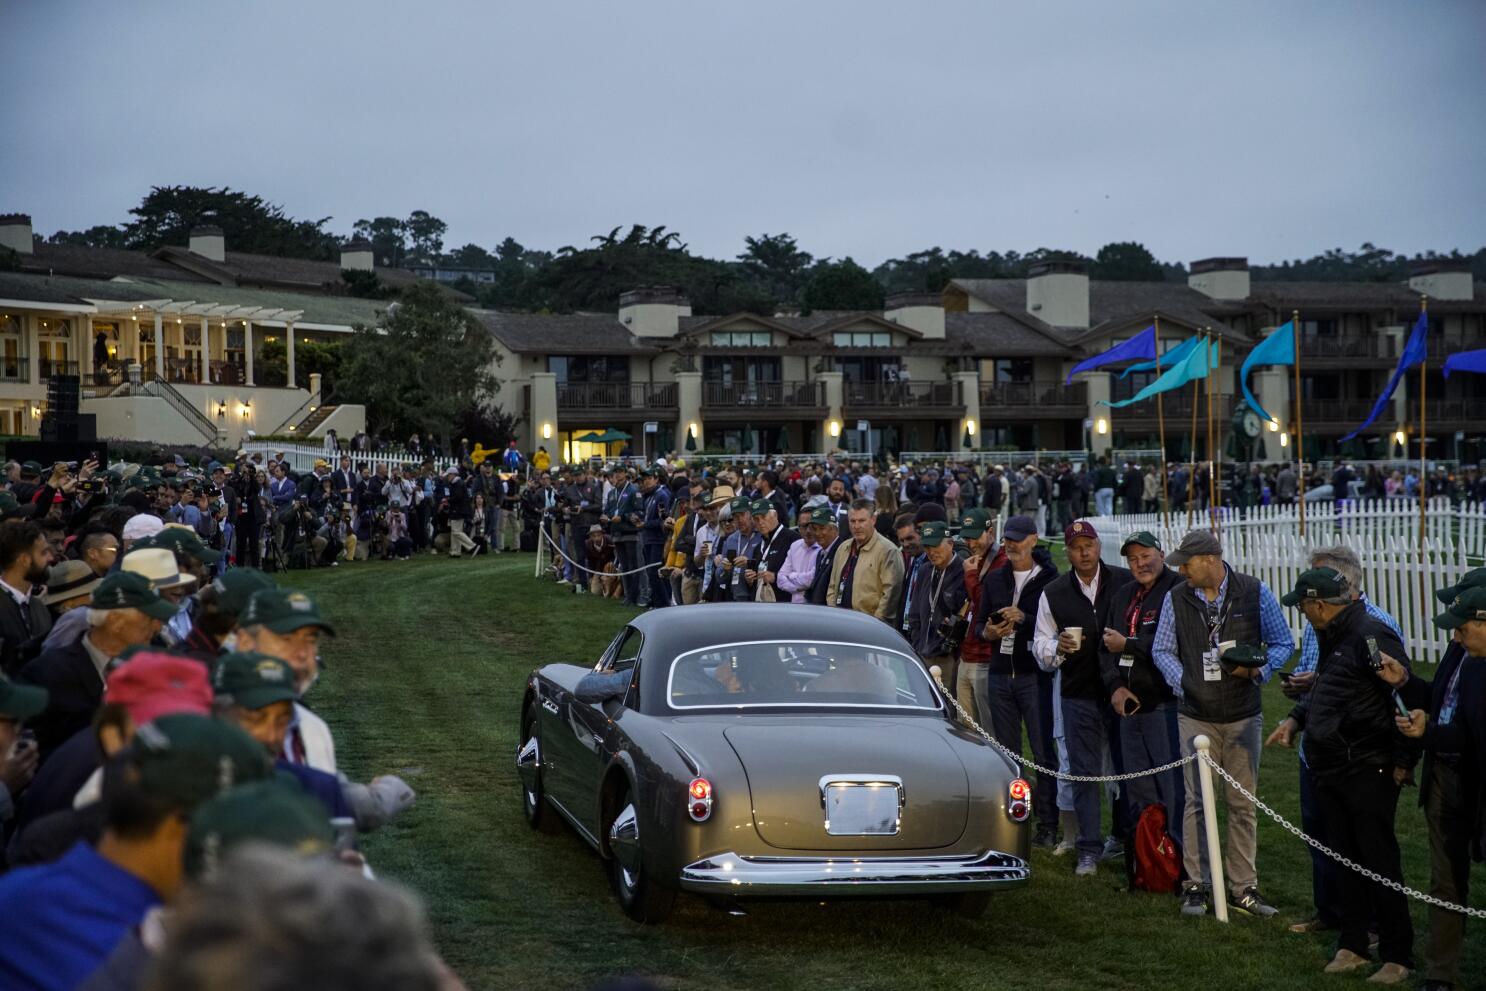 The judges of the Louis Vuitton Classic, a classic car and